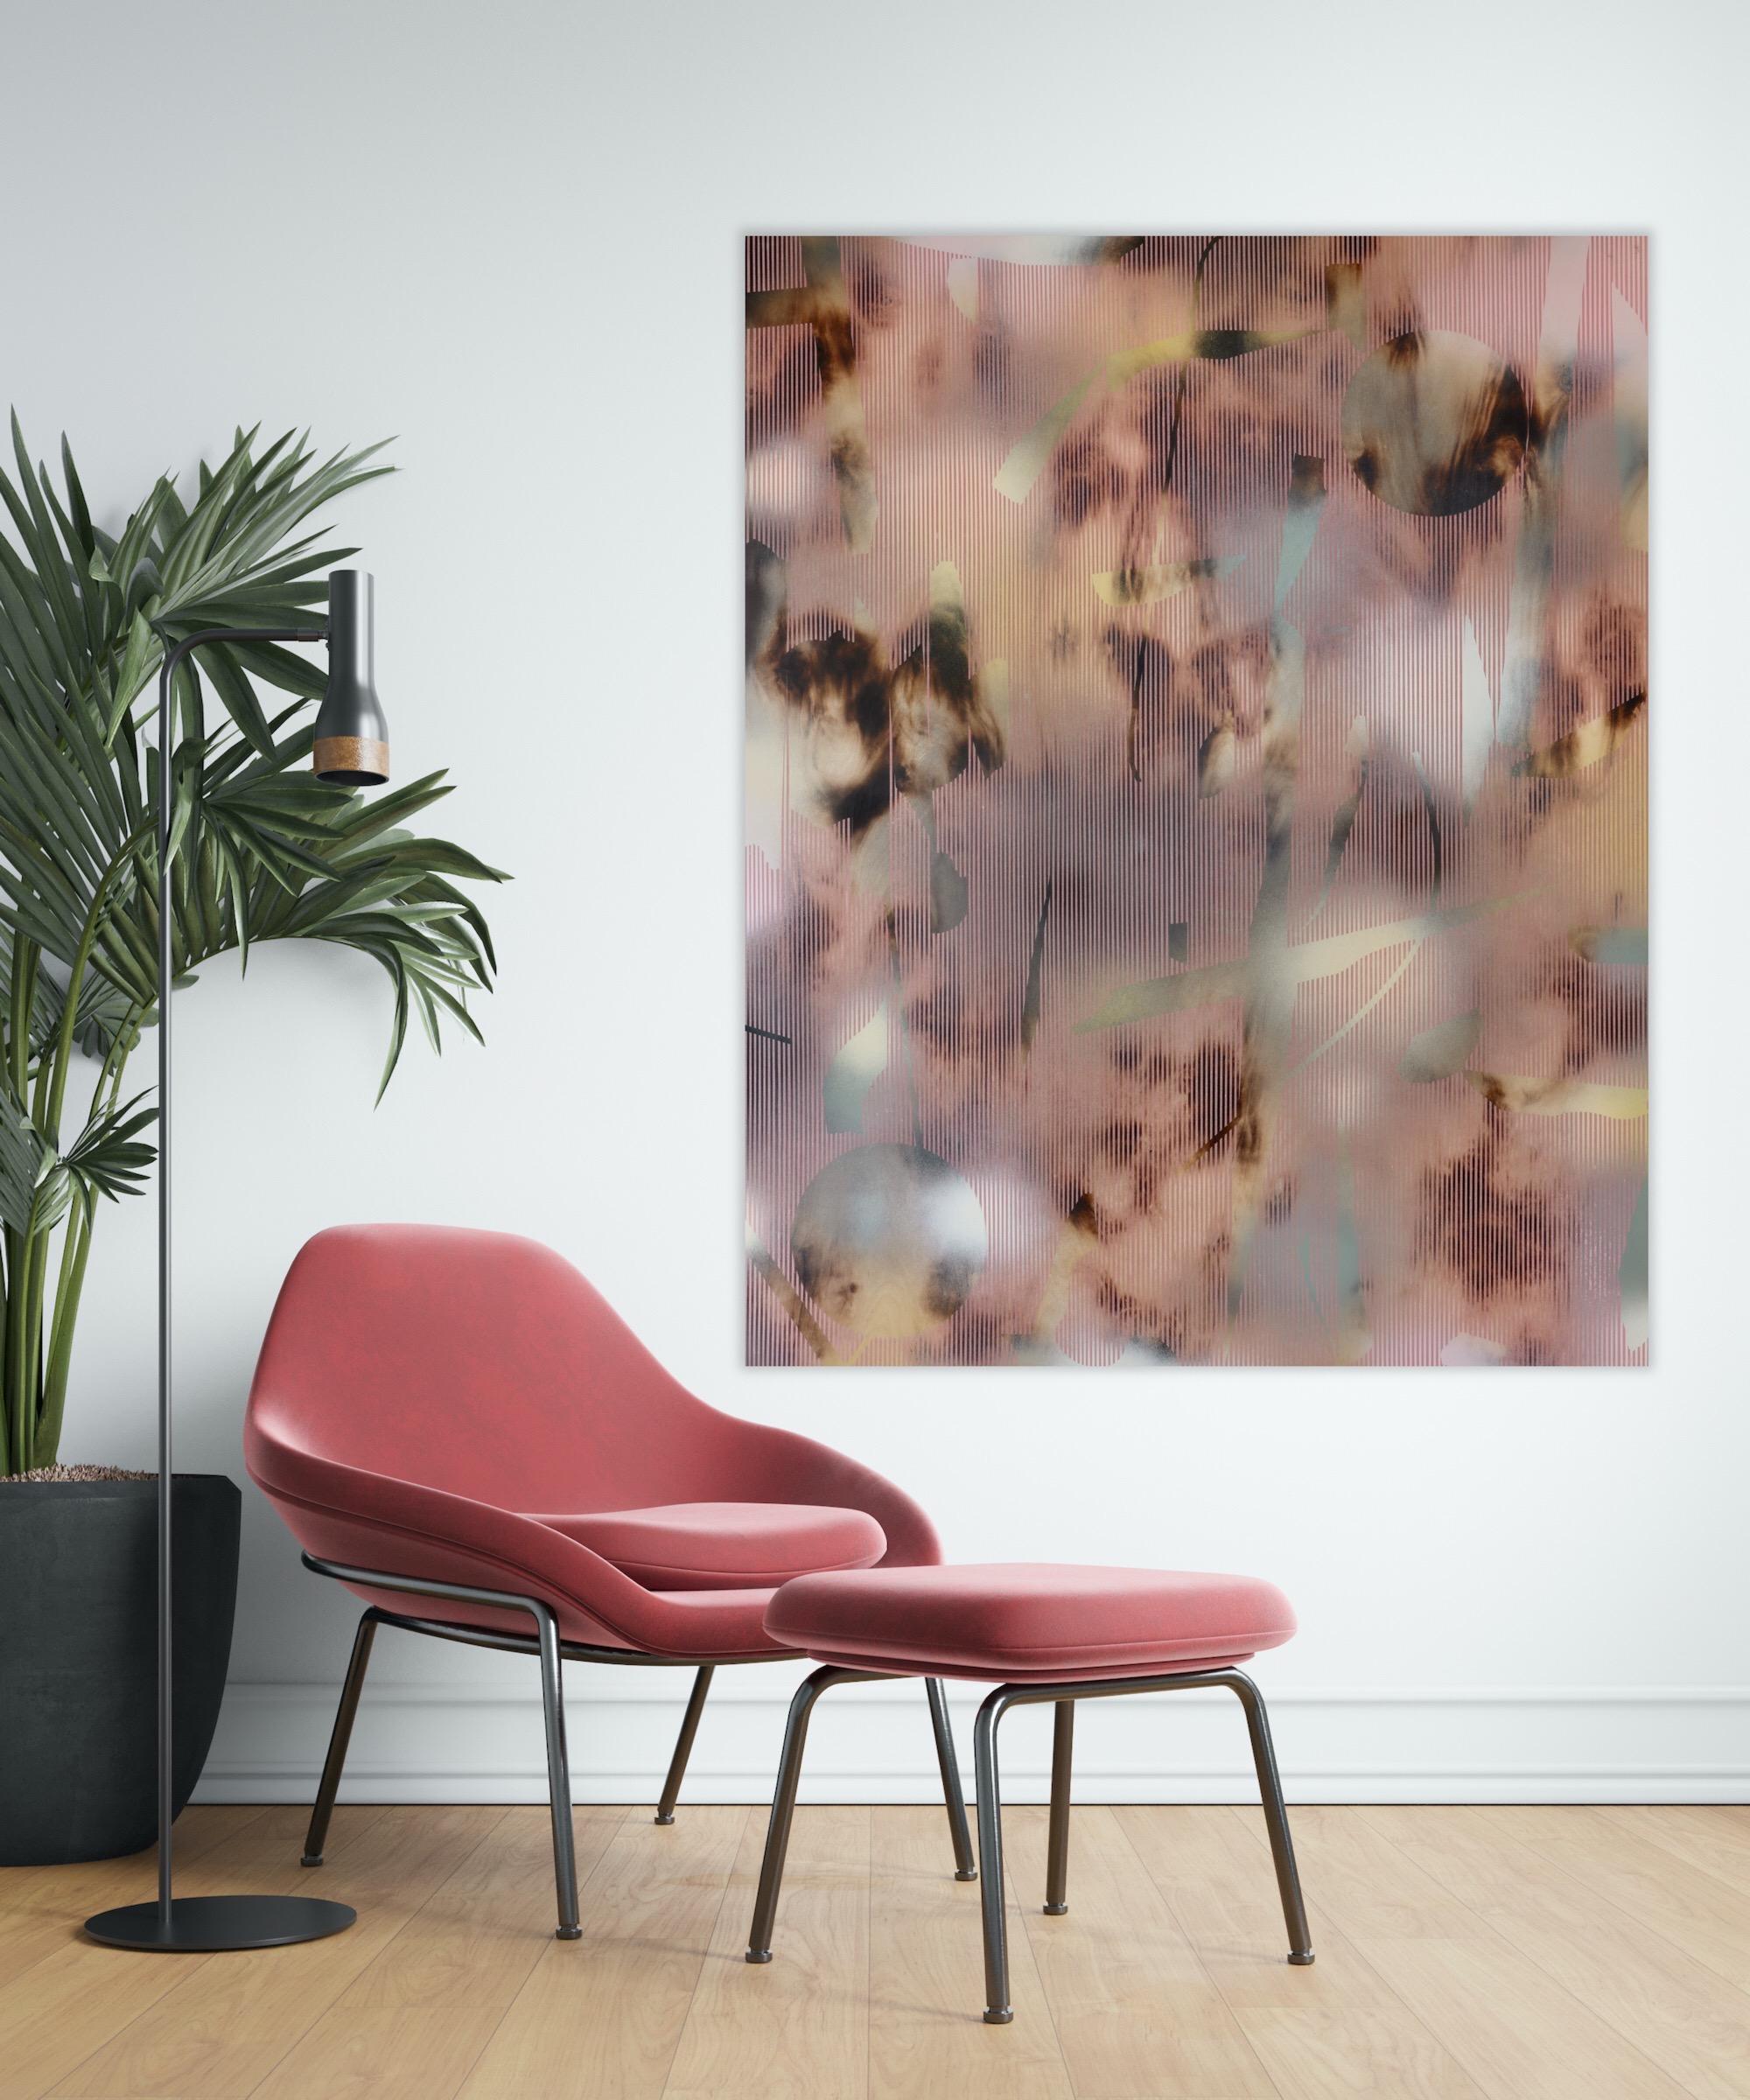 Turbulence x1 (pink tripes lines wood abstract grid optimal contemporary design) For Sale 5